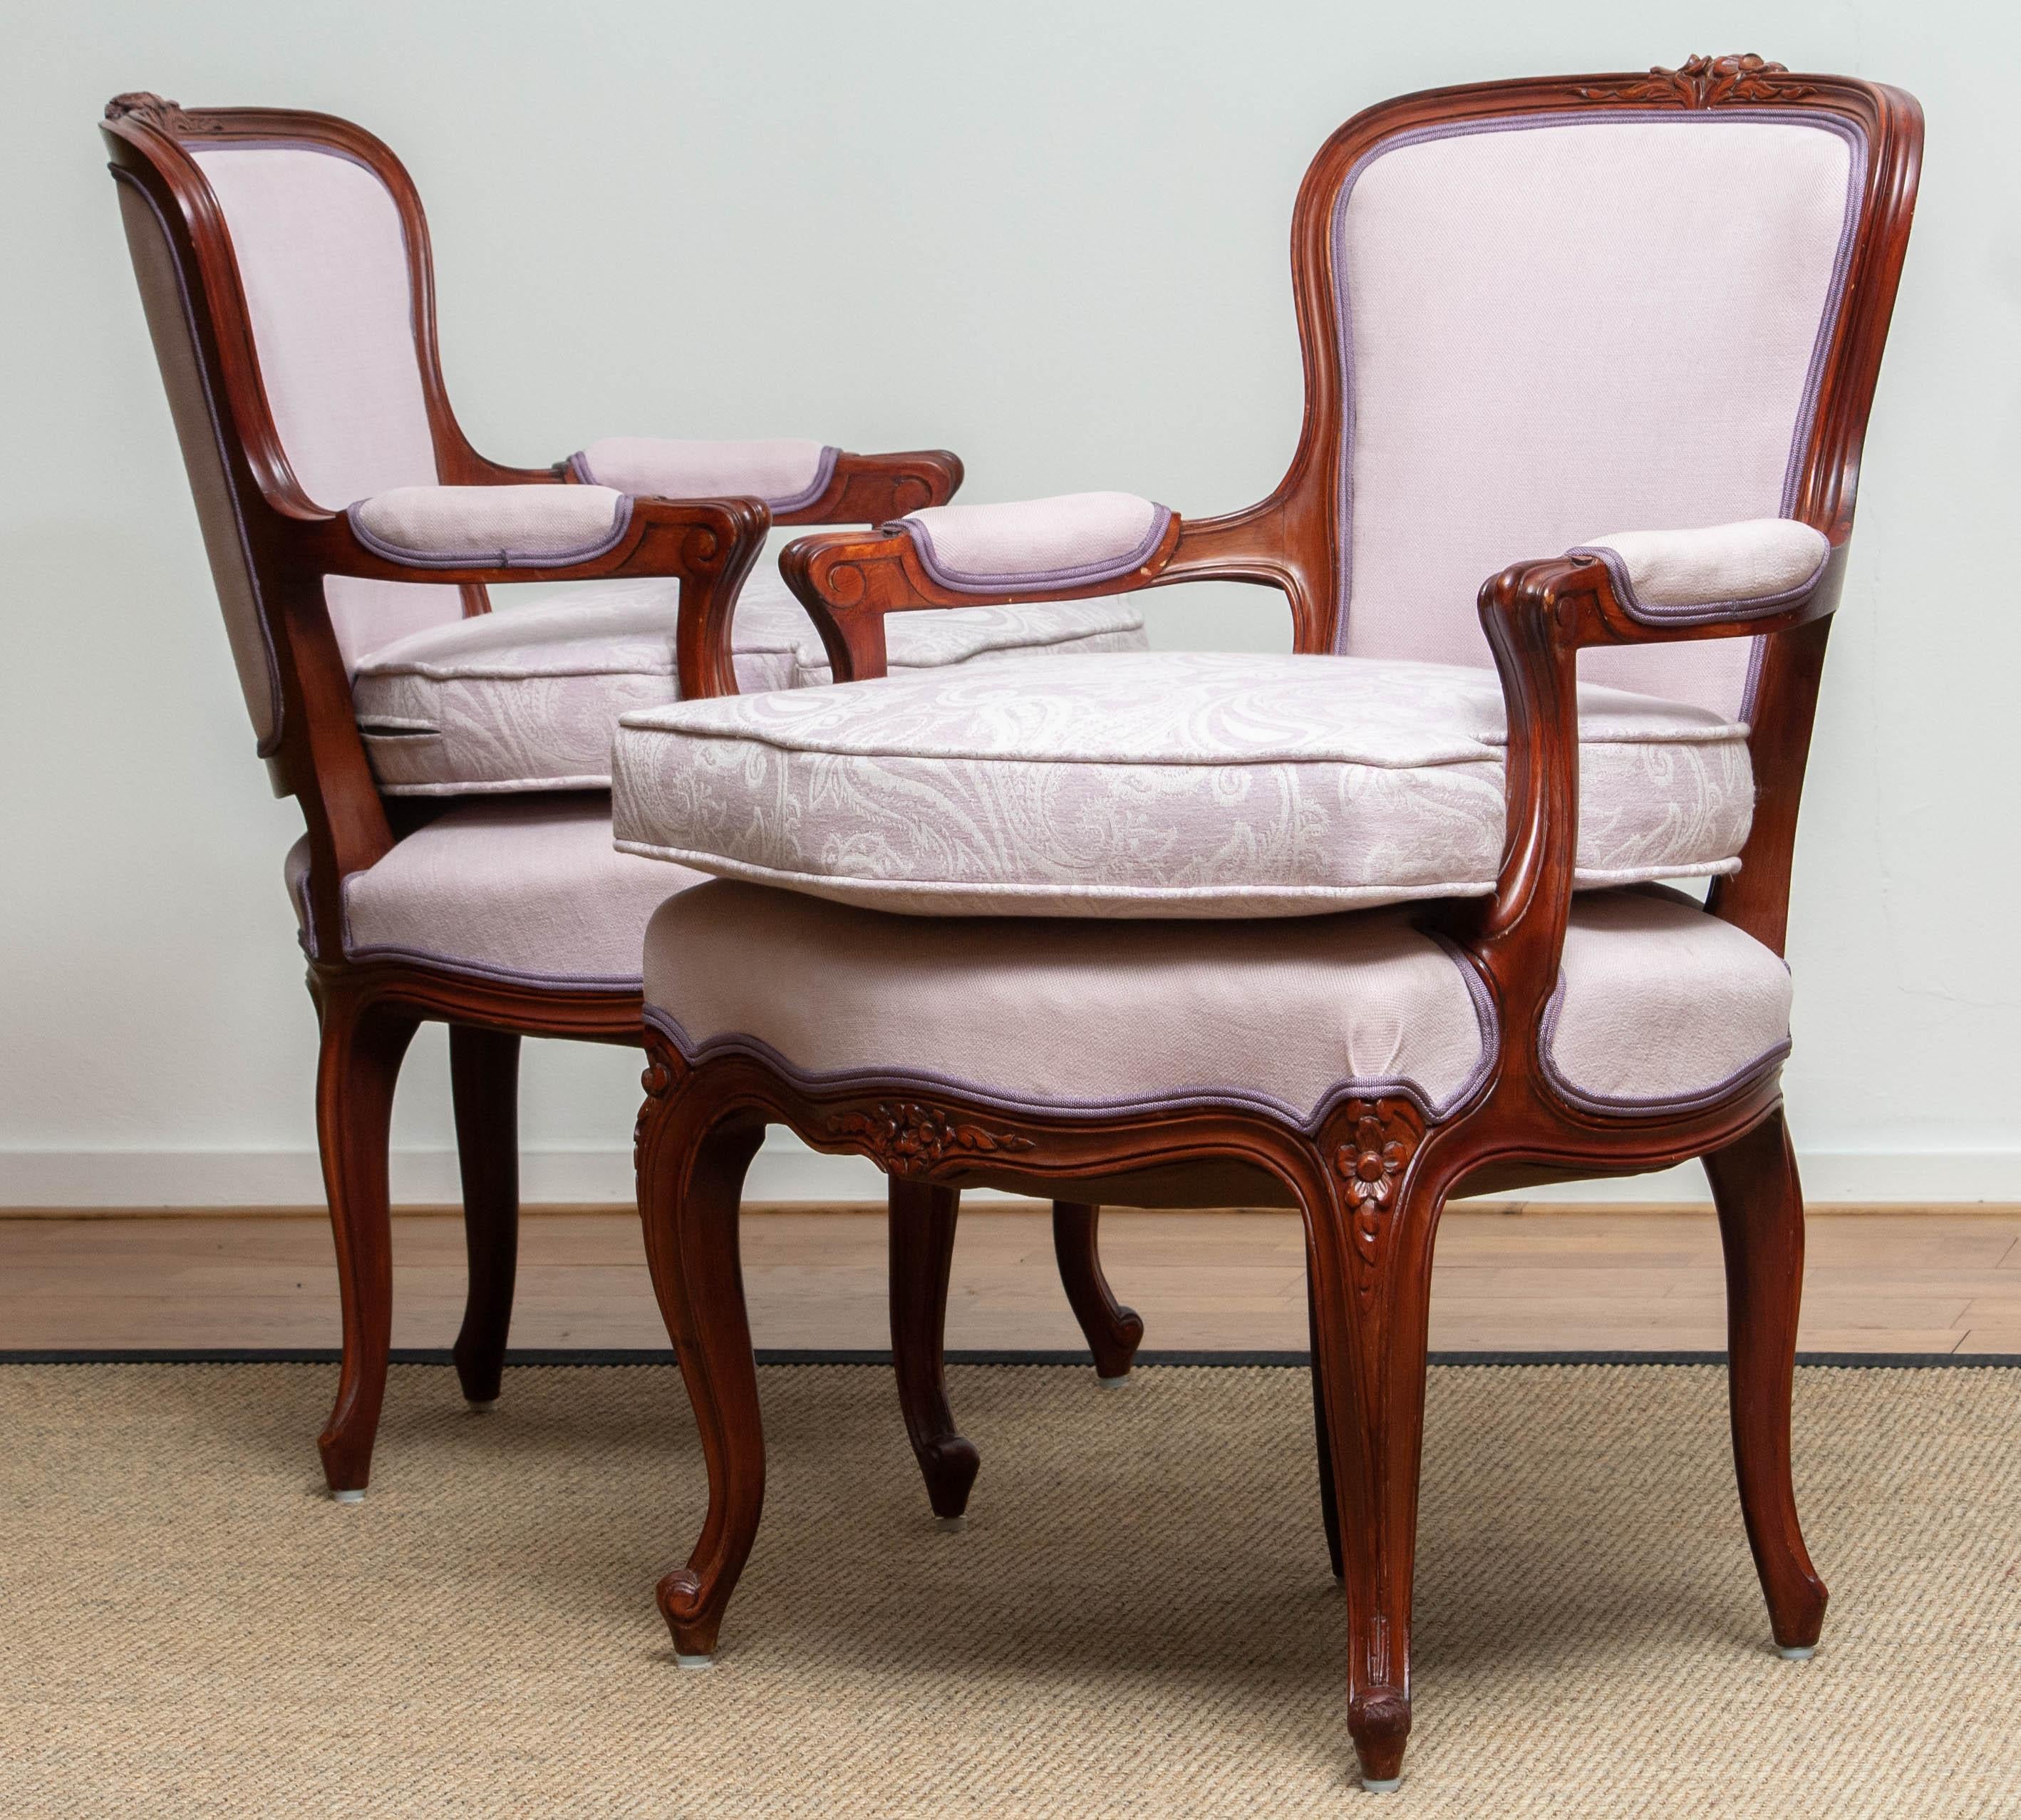 1950s, The Swedish Neo-Rococo, and finished in the shabby chic technique armchair is in perfect condition. Upholstered in pink fabric and an extra cushion for extra comfort also in pink jacquard. Seat height with the extra cushion is: 21.20 inches